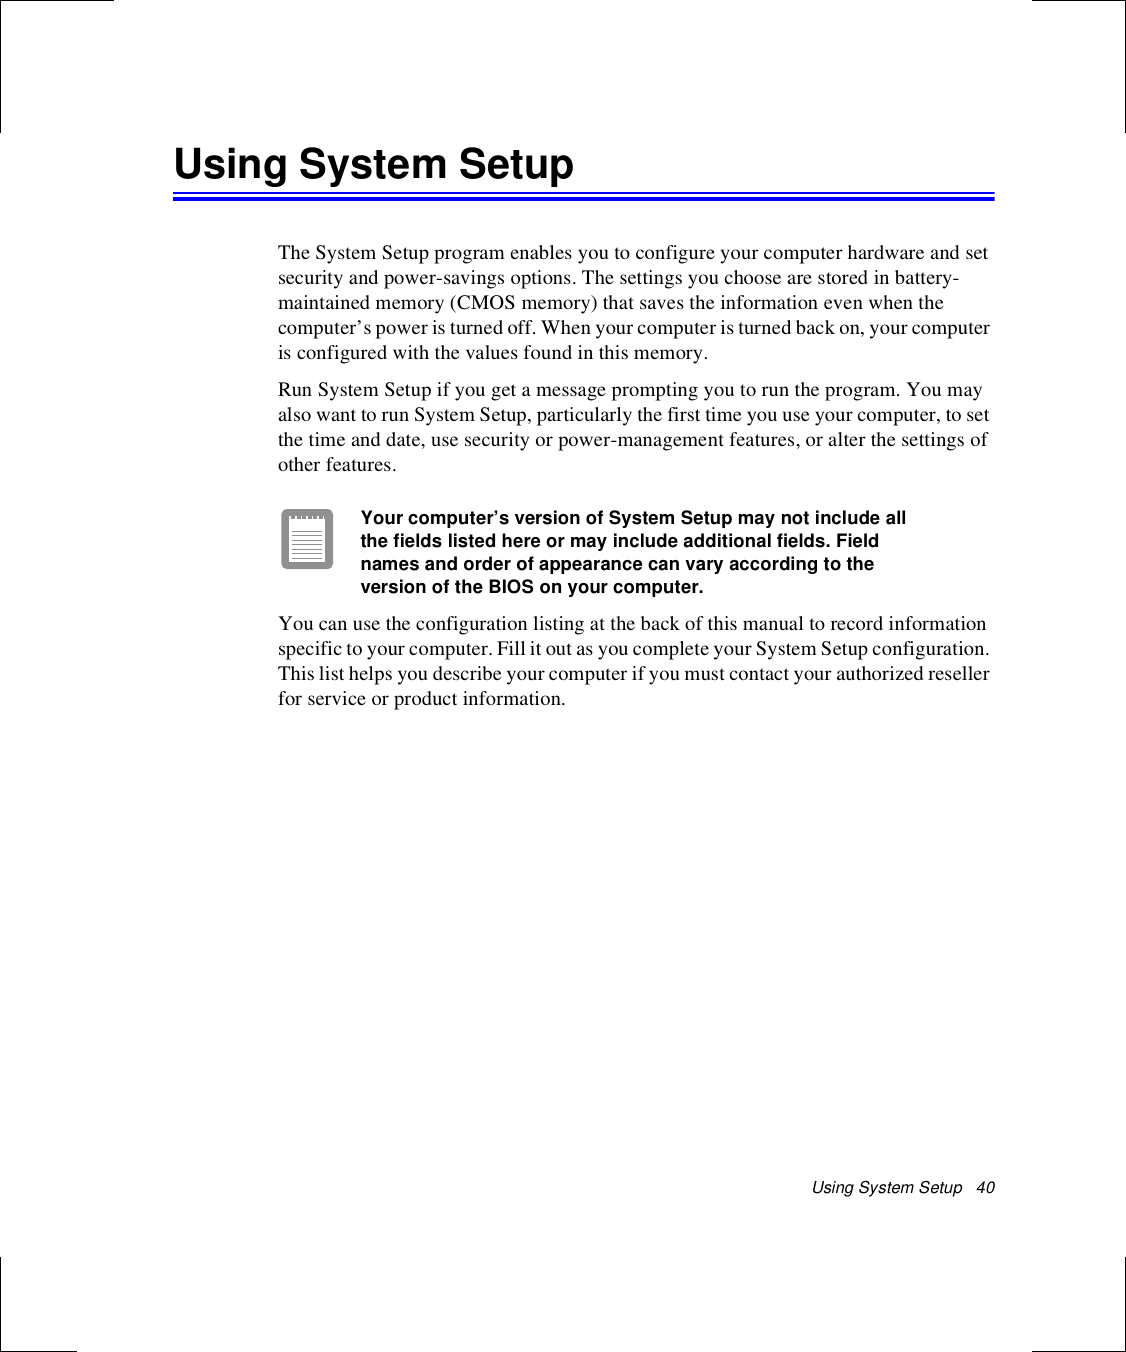 Using System Setup   40Using System SetupThe System Setup program enables you to configure your computer hardware and set security and power-savings options. The settings you choose are stored in battery-maintained memory (CMOS memory) that saves the information even when the computer’s power is turned off. When your computer is turned back on, your computer is configured with the values found in this memory.Run System Setup if you get a message prompting you to run the program. You may also want to run System Setup, particularly the first time you use your computer, to set the time and date, use security or power-management features, or alter the settings of other features.Your computer’s version of System Setup may not include all the fields listed here or may include additional fields. Field names and order of appearance can vary according to the version of the BIOS on your computer.You can use the configuration listing at the back of this manual to record information specific to your computer. Fill it out as you complete your System Setup configuration. This list helps you describe your computer if you must contact your authorized reseller for service or product information.